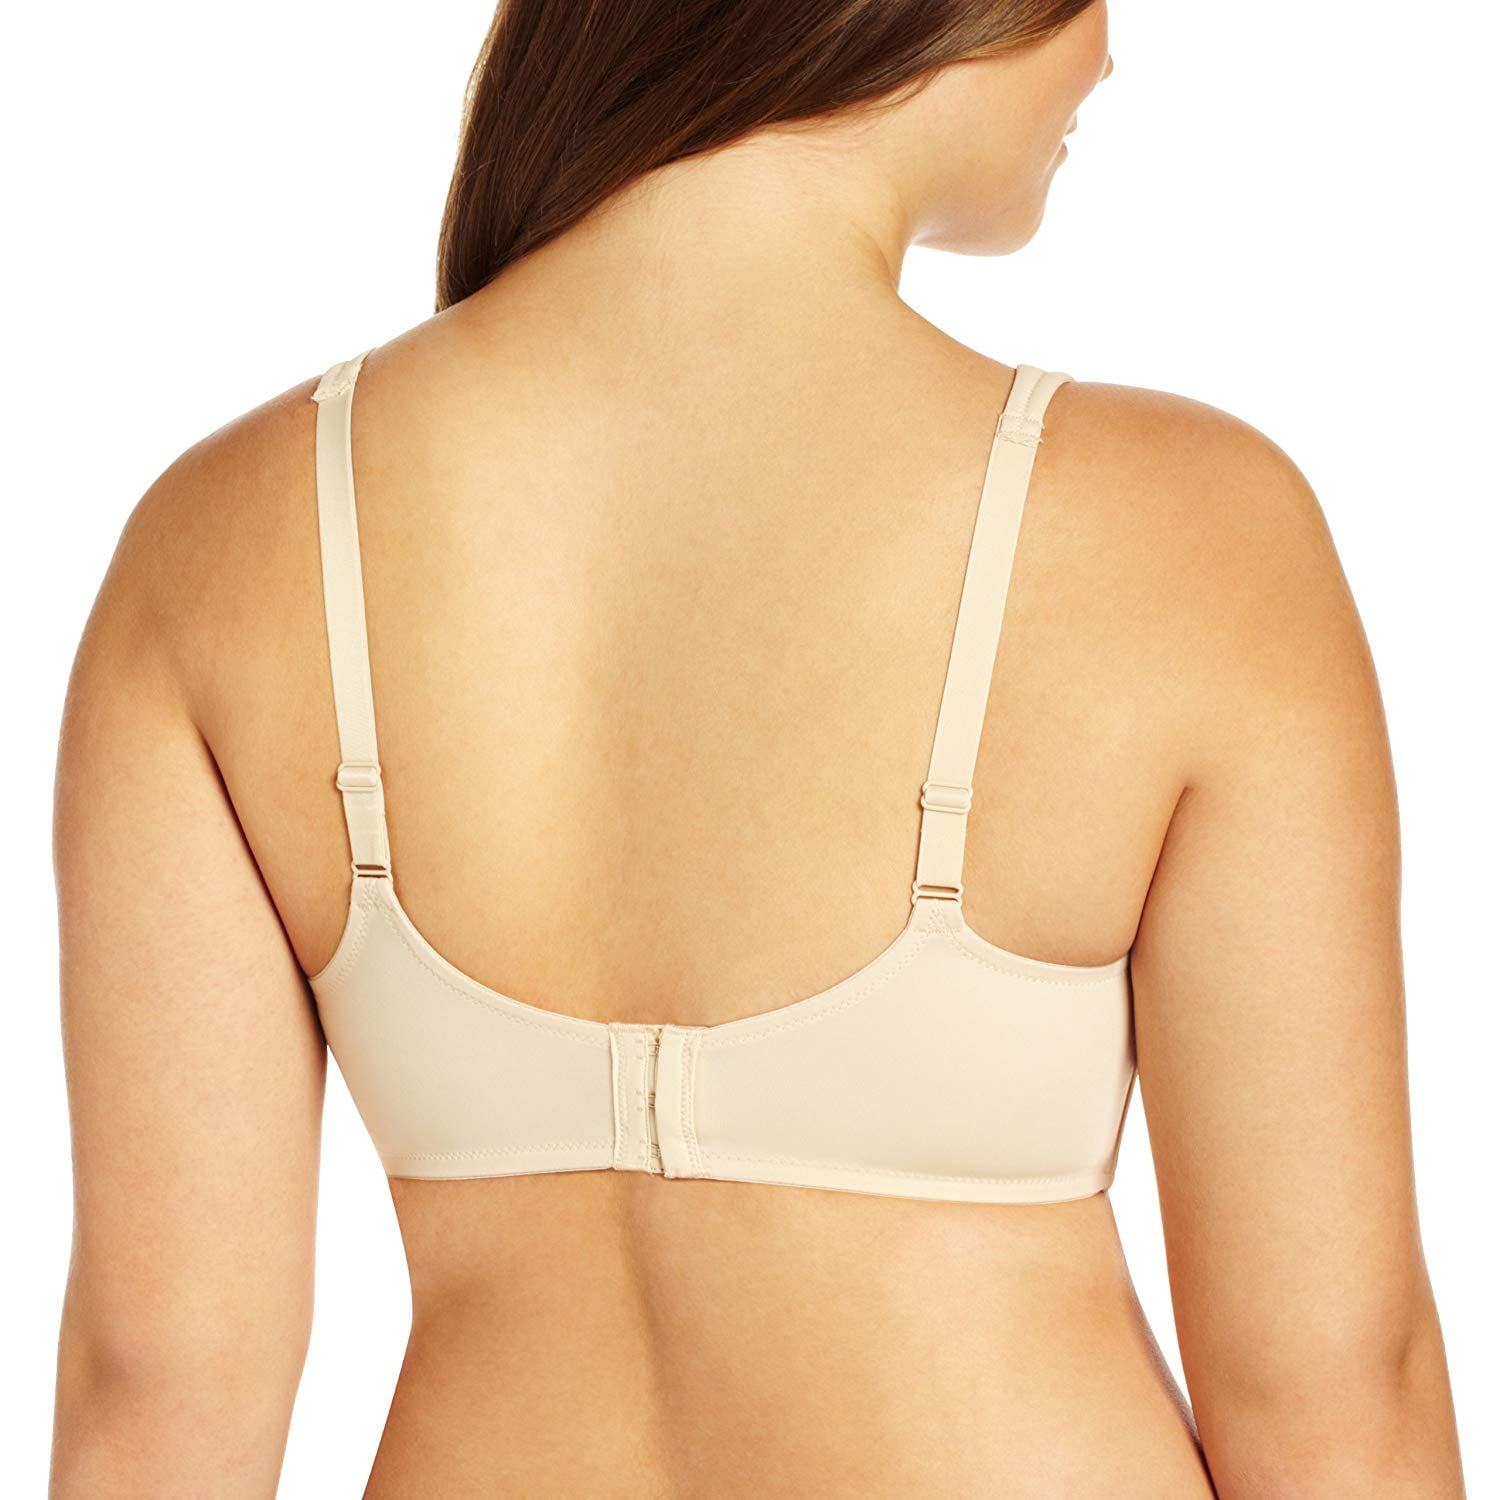 Leading Lady White Smooth Contour Bra, Size US 38A NWOT 